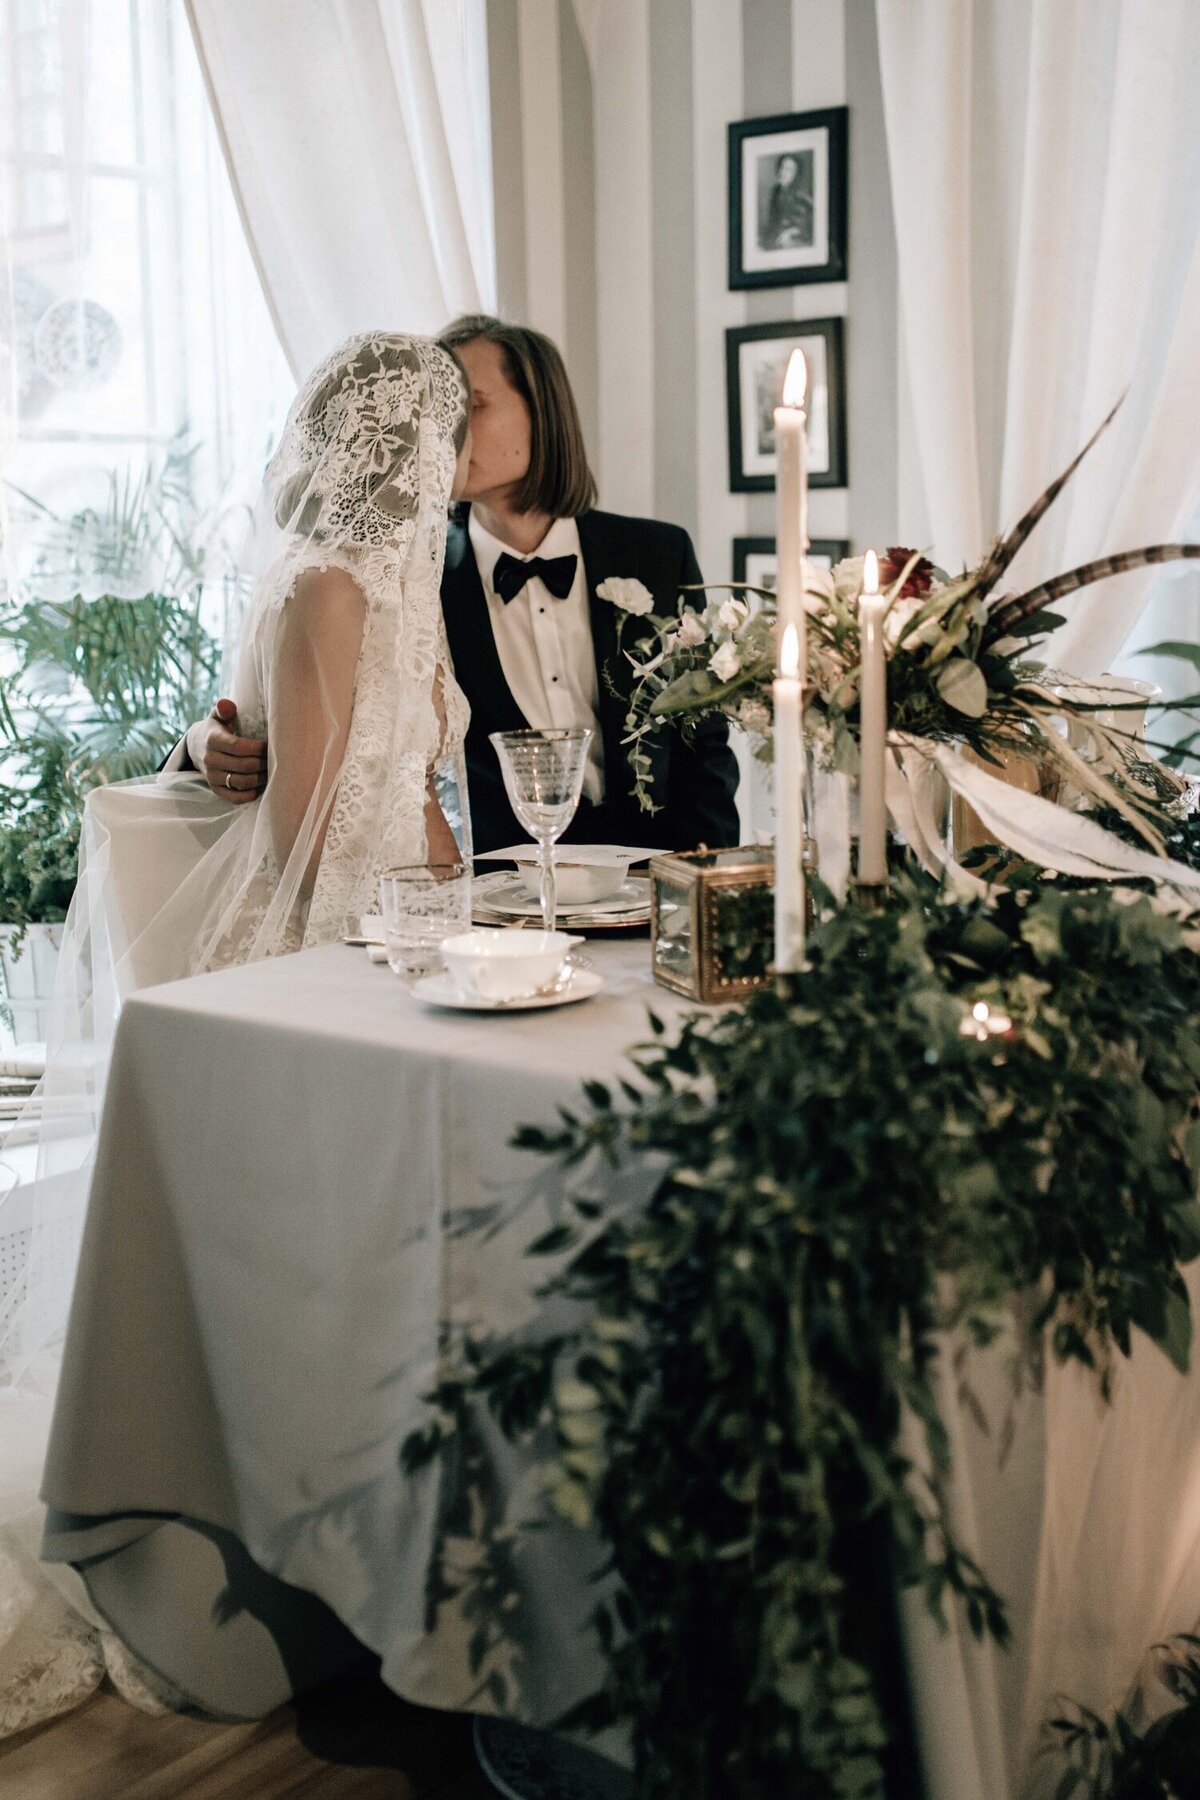 093_Flora_And_Grace_Europe_Fine_Art_Wedding_Photographer-164_A sophisticated fine art wedding in Europe with an editorial edge captured by Vogue wedding photographer Flora and Grace.